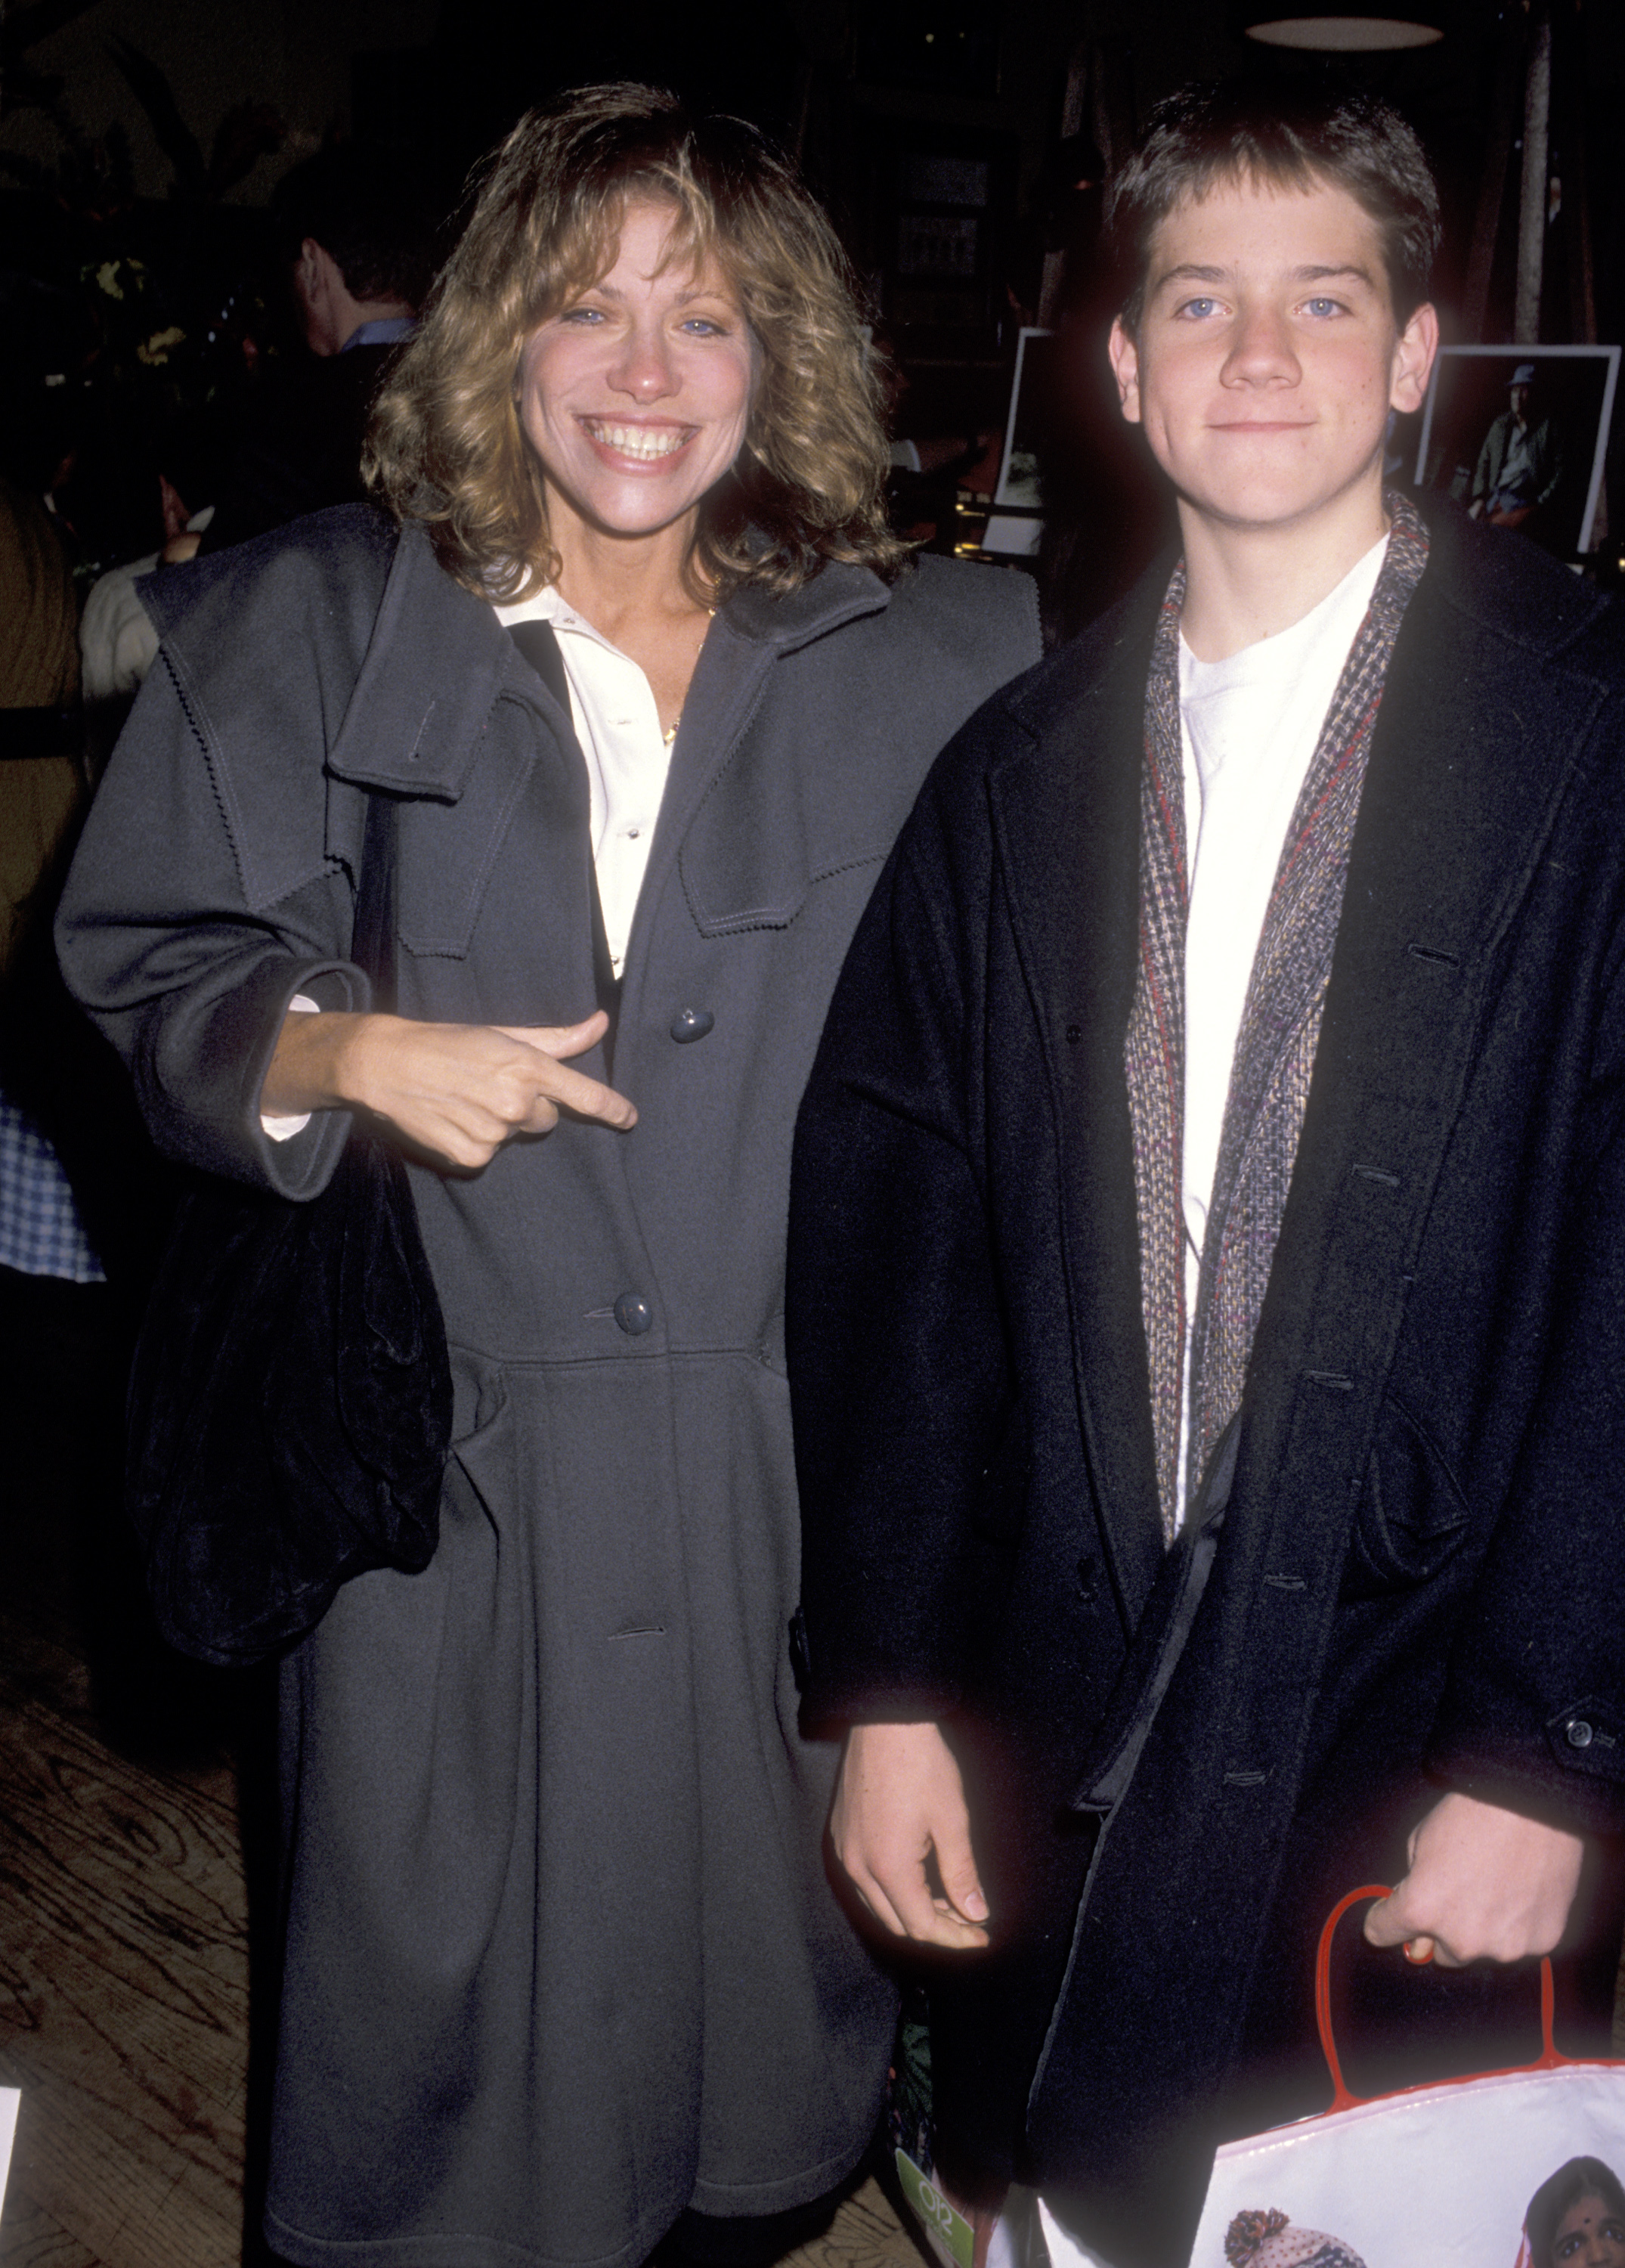 Musician Carly Simon and son Ben Taylor attend the "Danny the Champion of the World" New York City premiere party on November 18, 1989, at Hard Rock Cafe in New York City. | Source: Getty Images